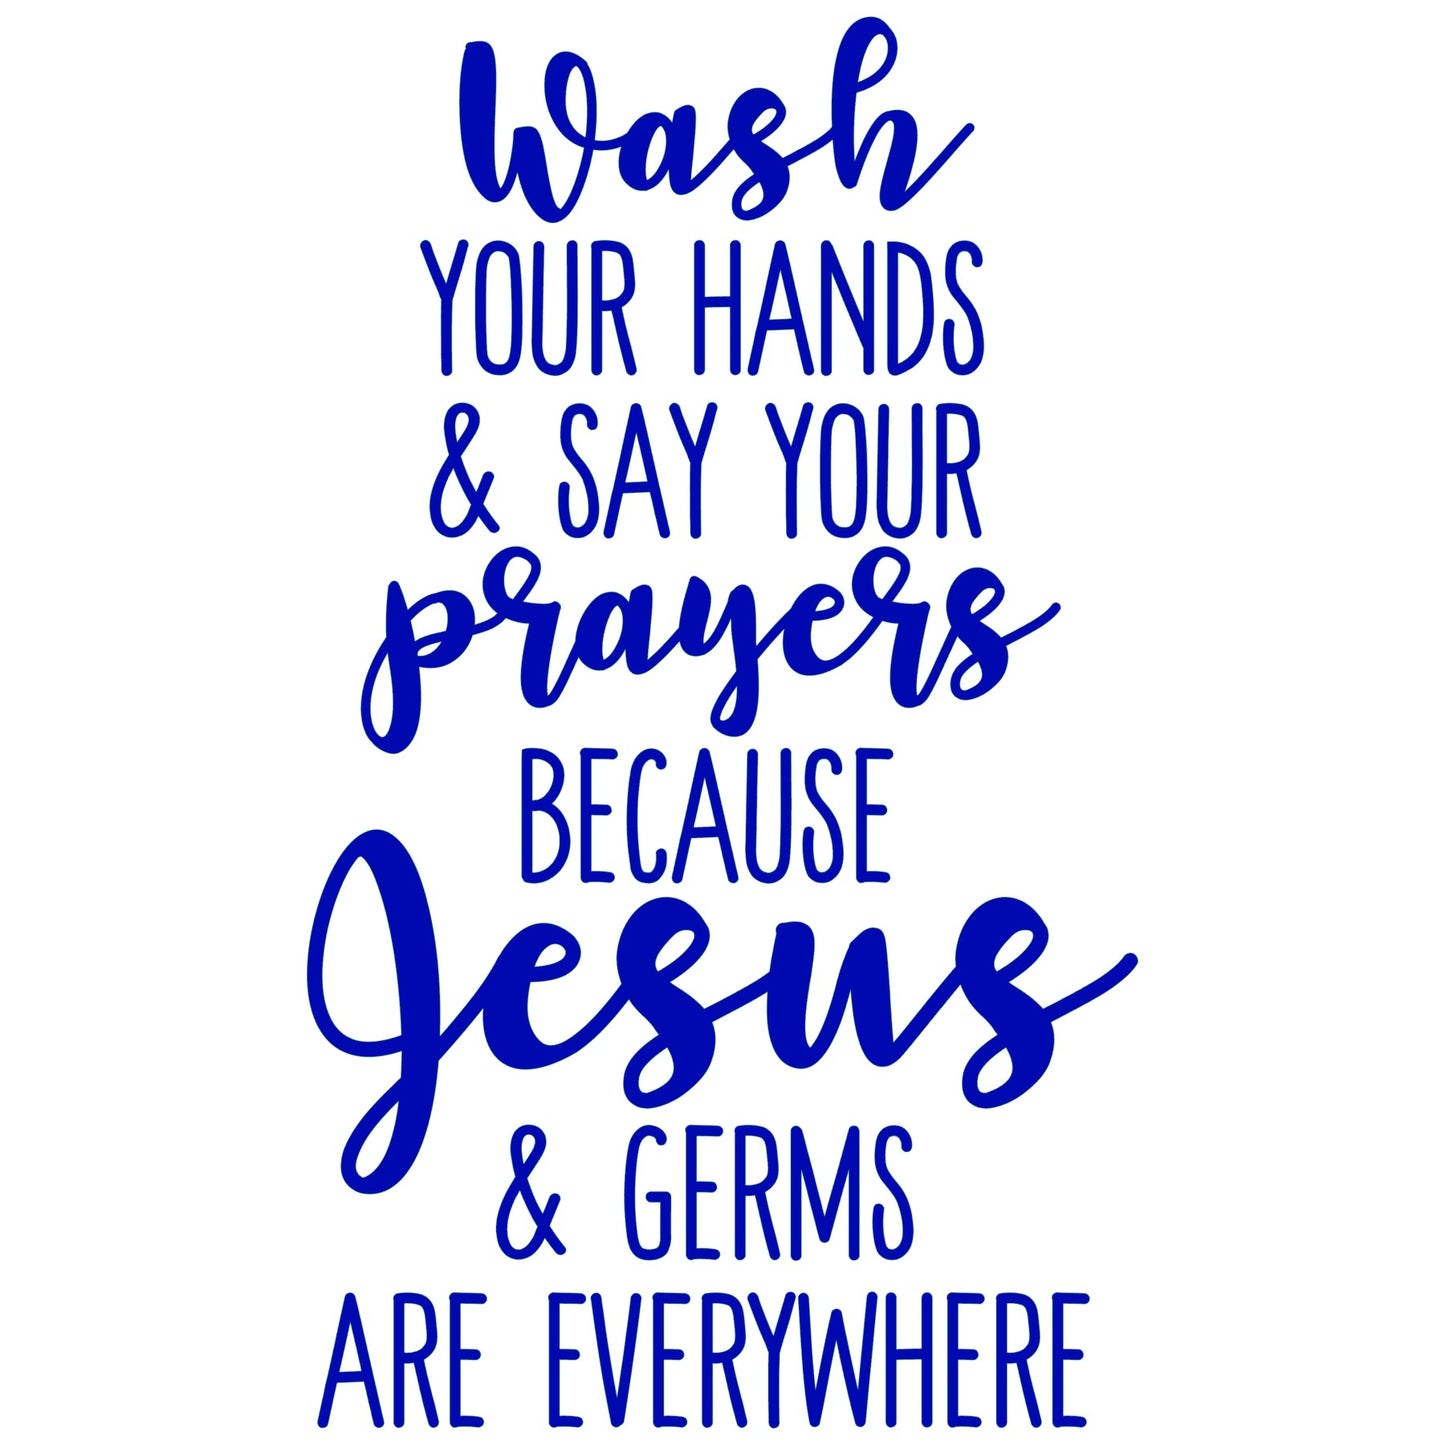 Wash Your Hands & Say Your Prayers Because Jesus & Germs Are Everywhere